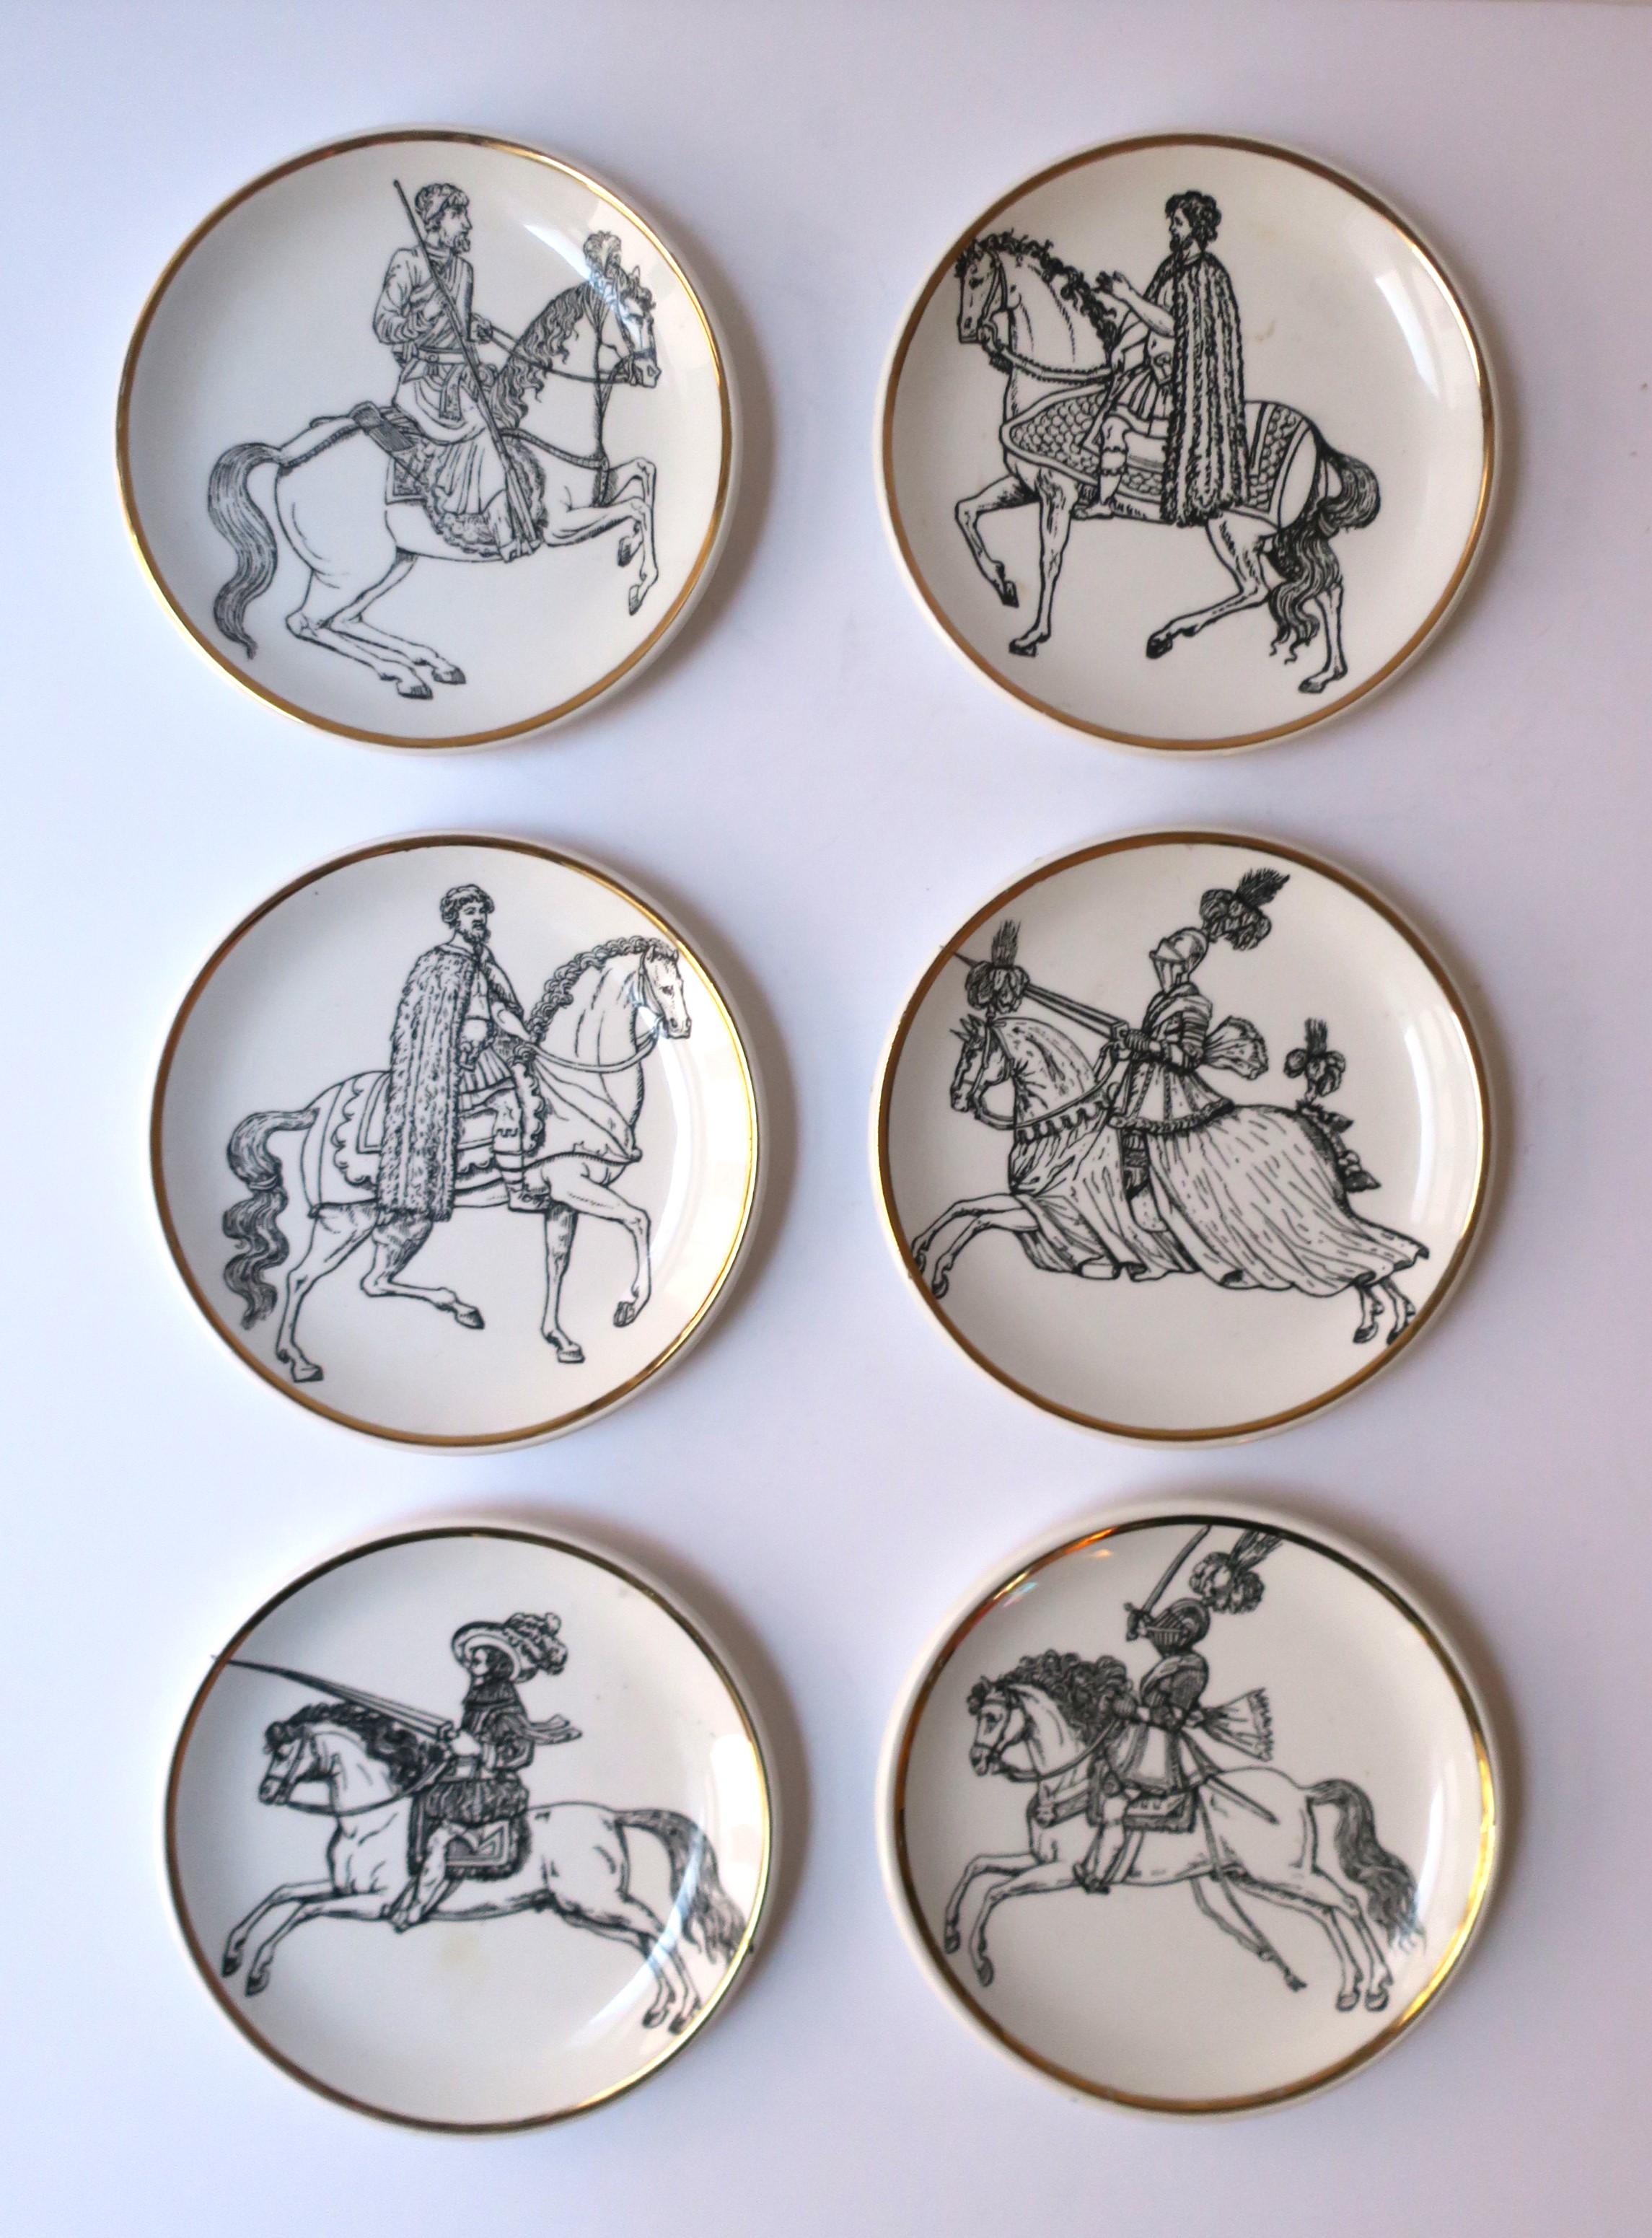 A set of six (6) Italian Piero Fornasetti cocktail drinks coasters 'Cavalieri', Classical Roman style, circa mid-20th century, 1960s, Italy. A set of six in black and white edged in gold, each with a different motif of beautiful horse and man with